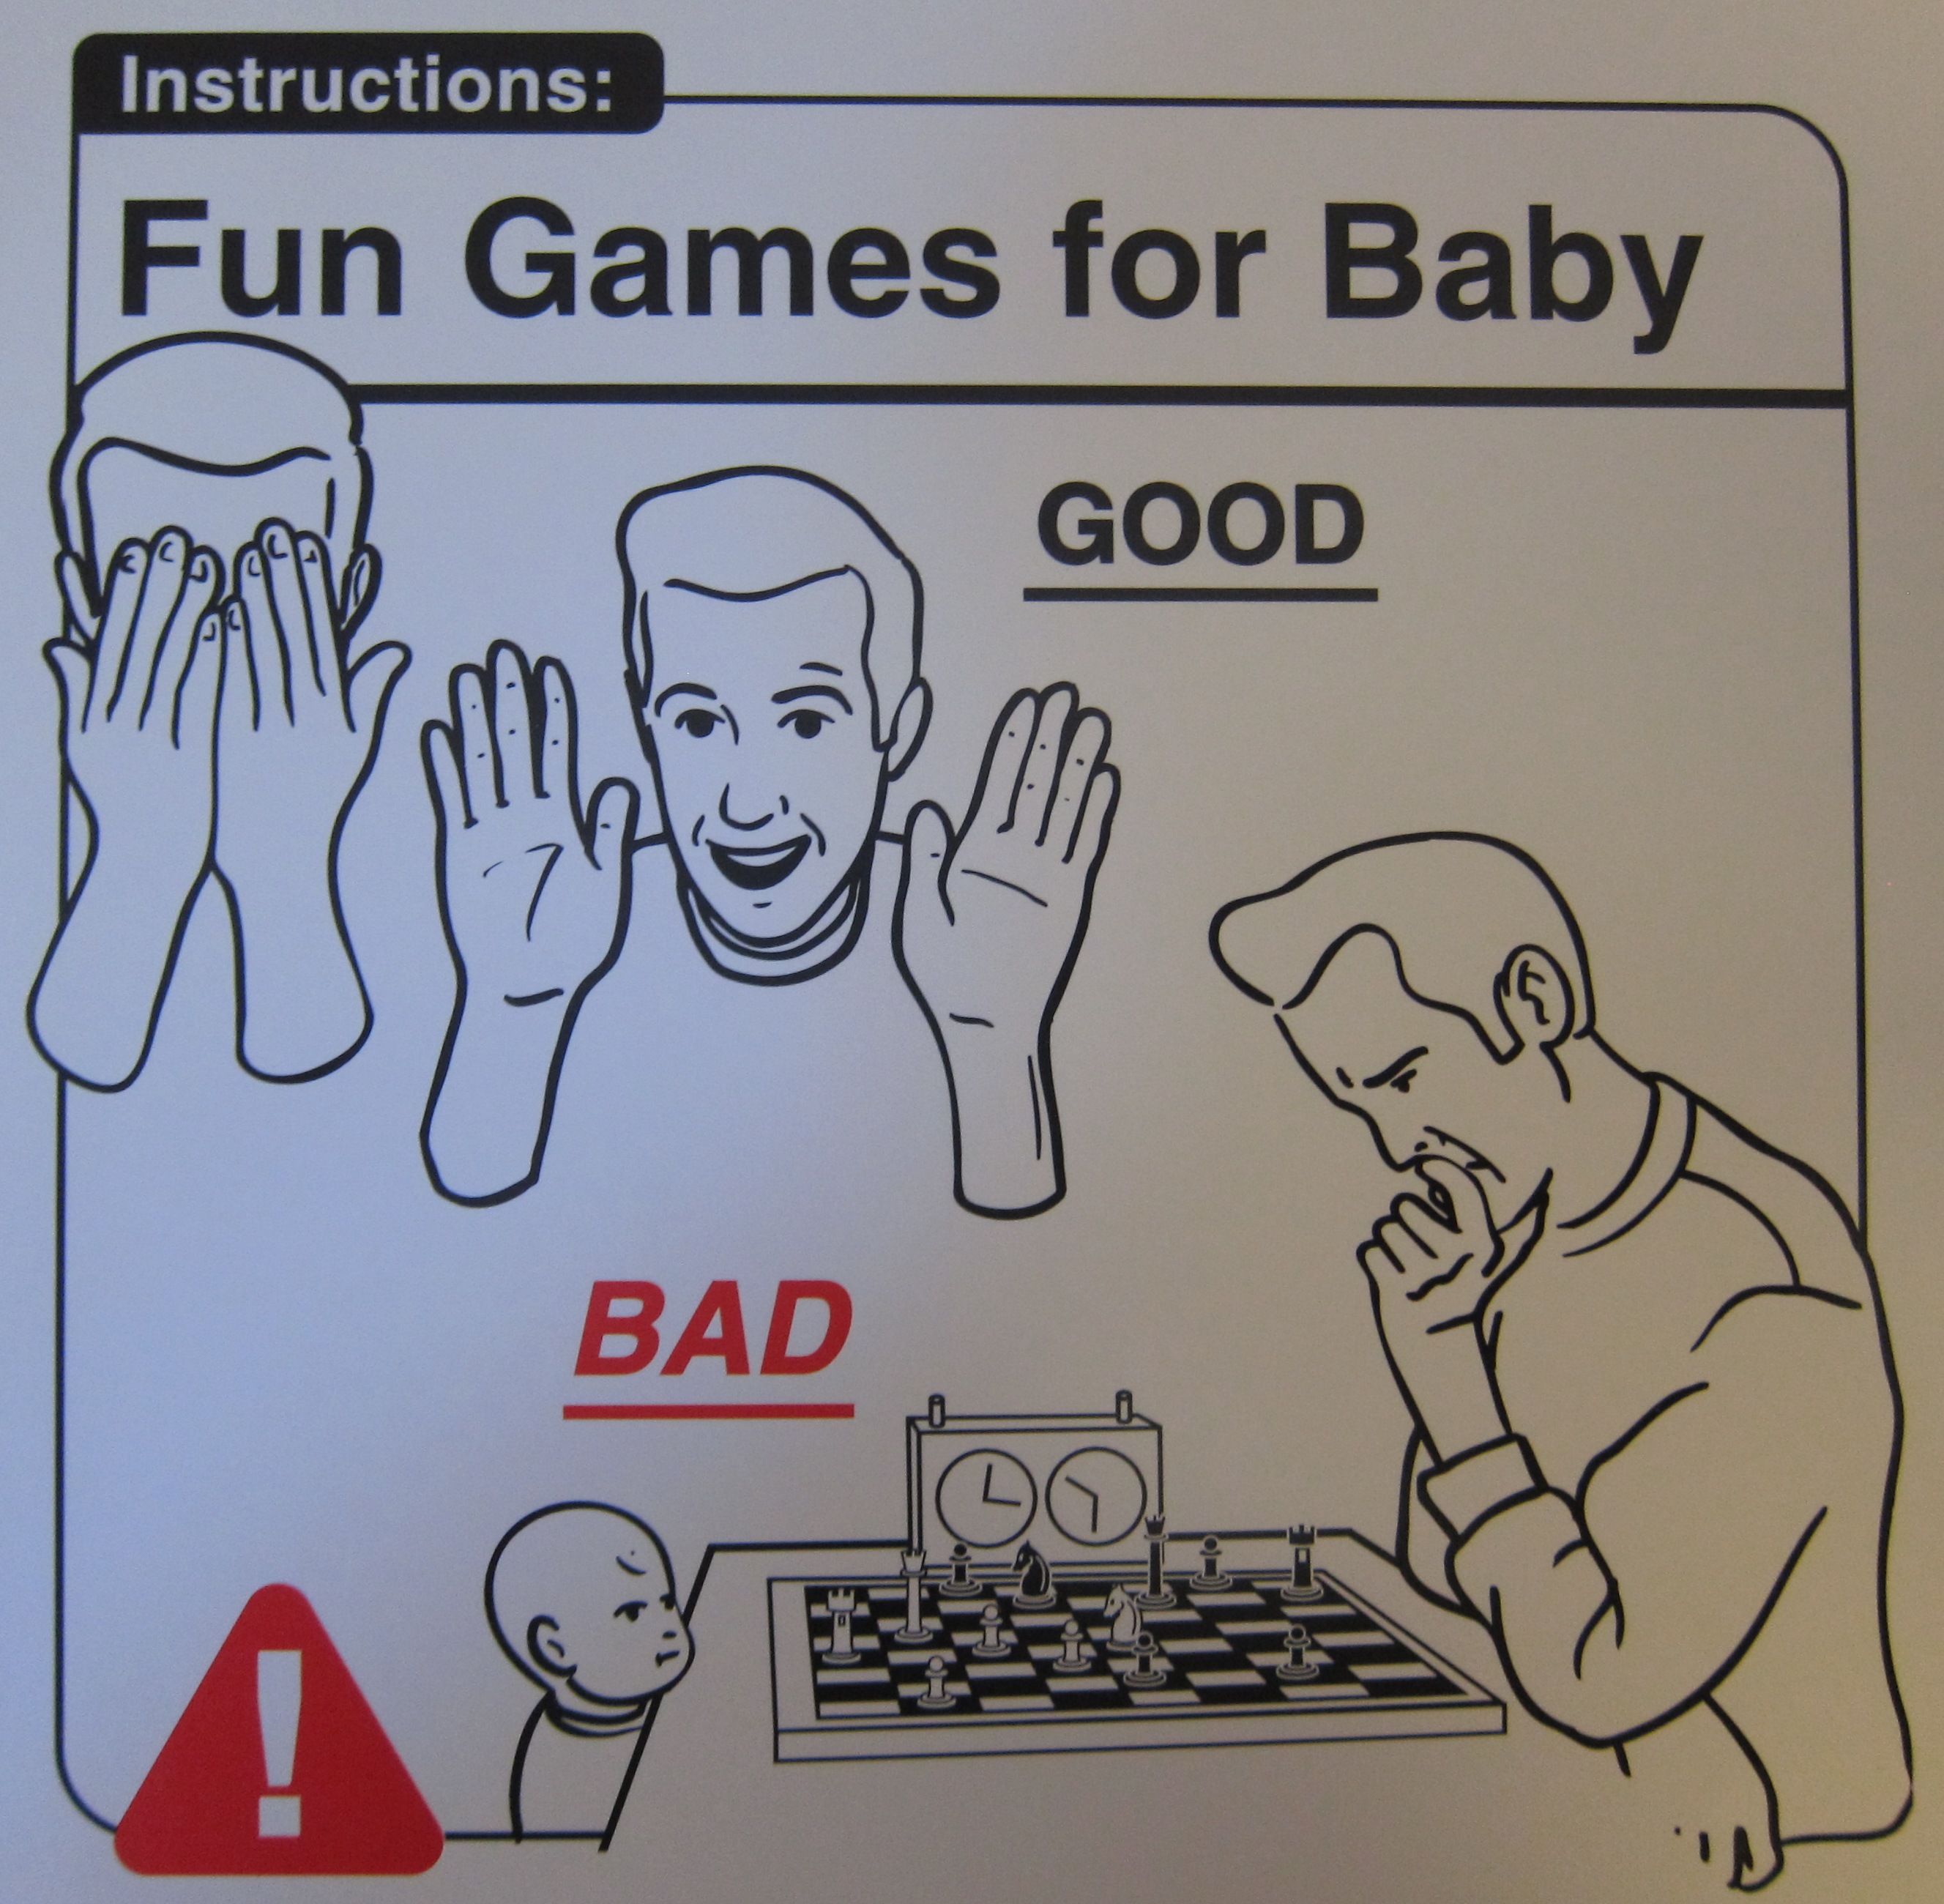 Parenting Tip of the Week 1 – No Chess for Baby